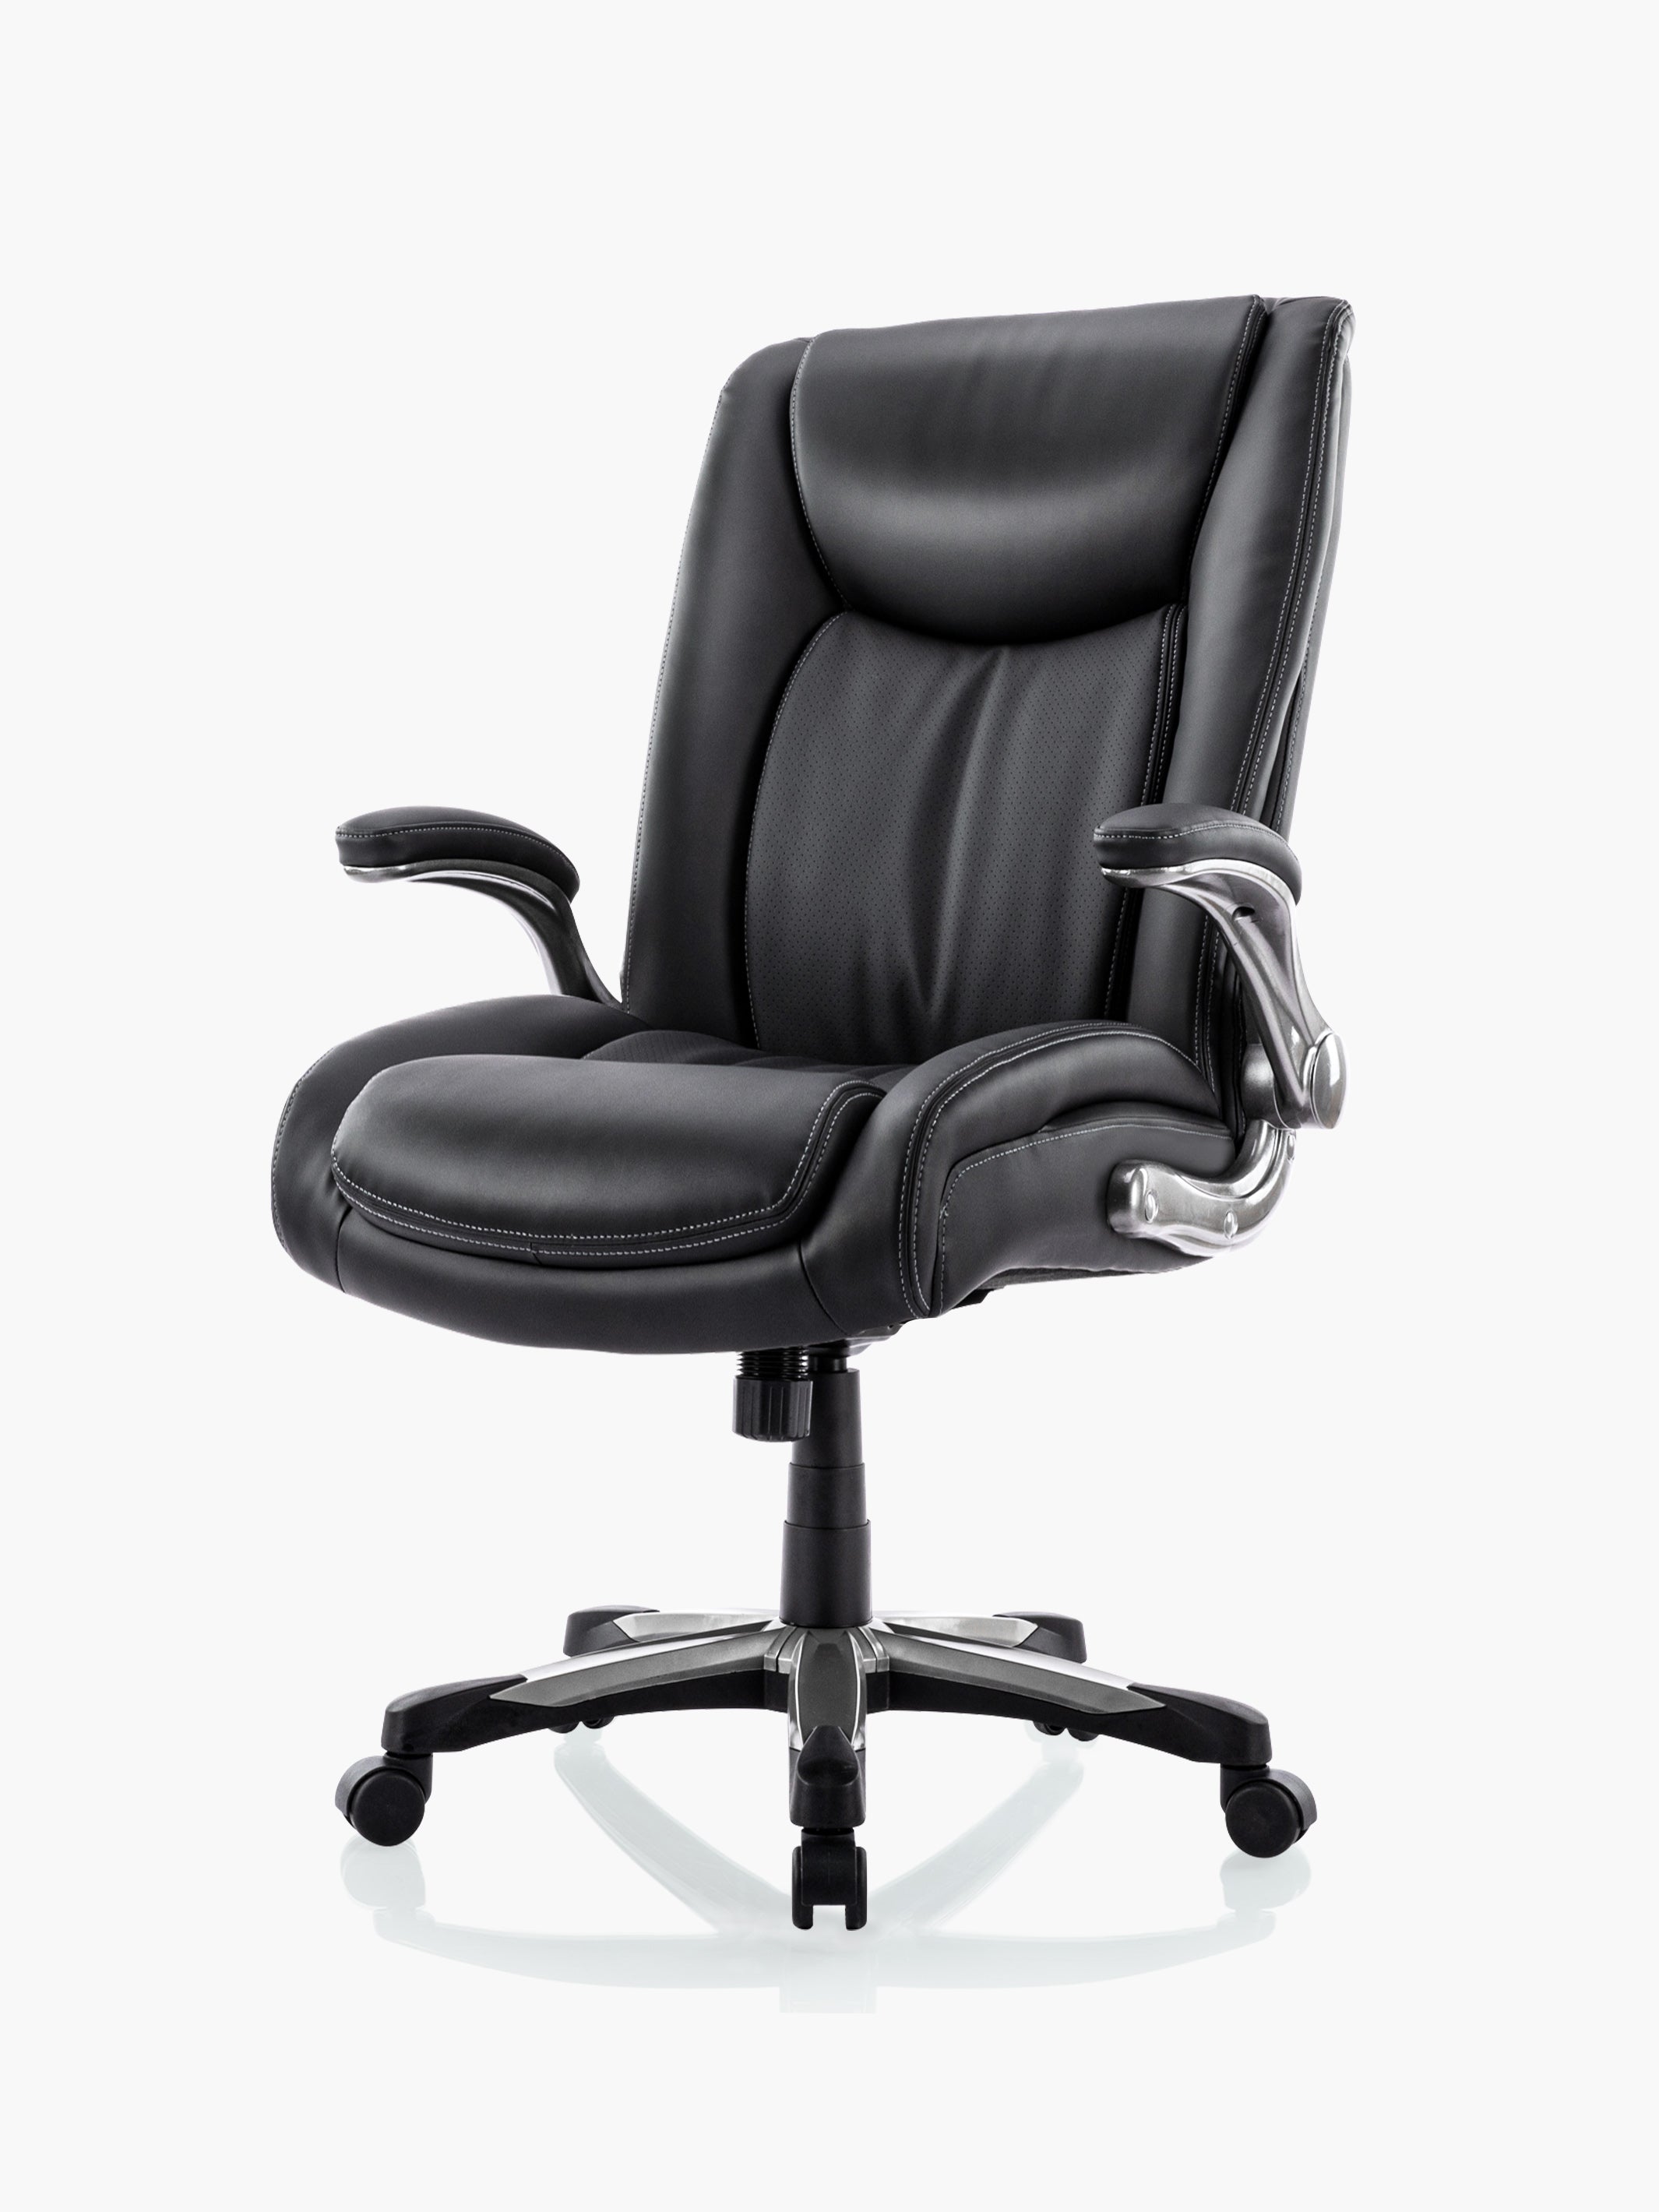 COLAMY Ergonomic Big and Tall Leather Office chair CL5309 Brown #color_black